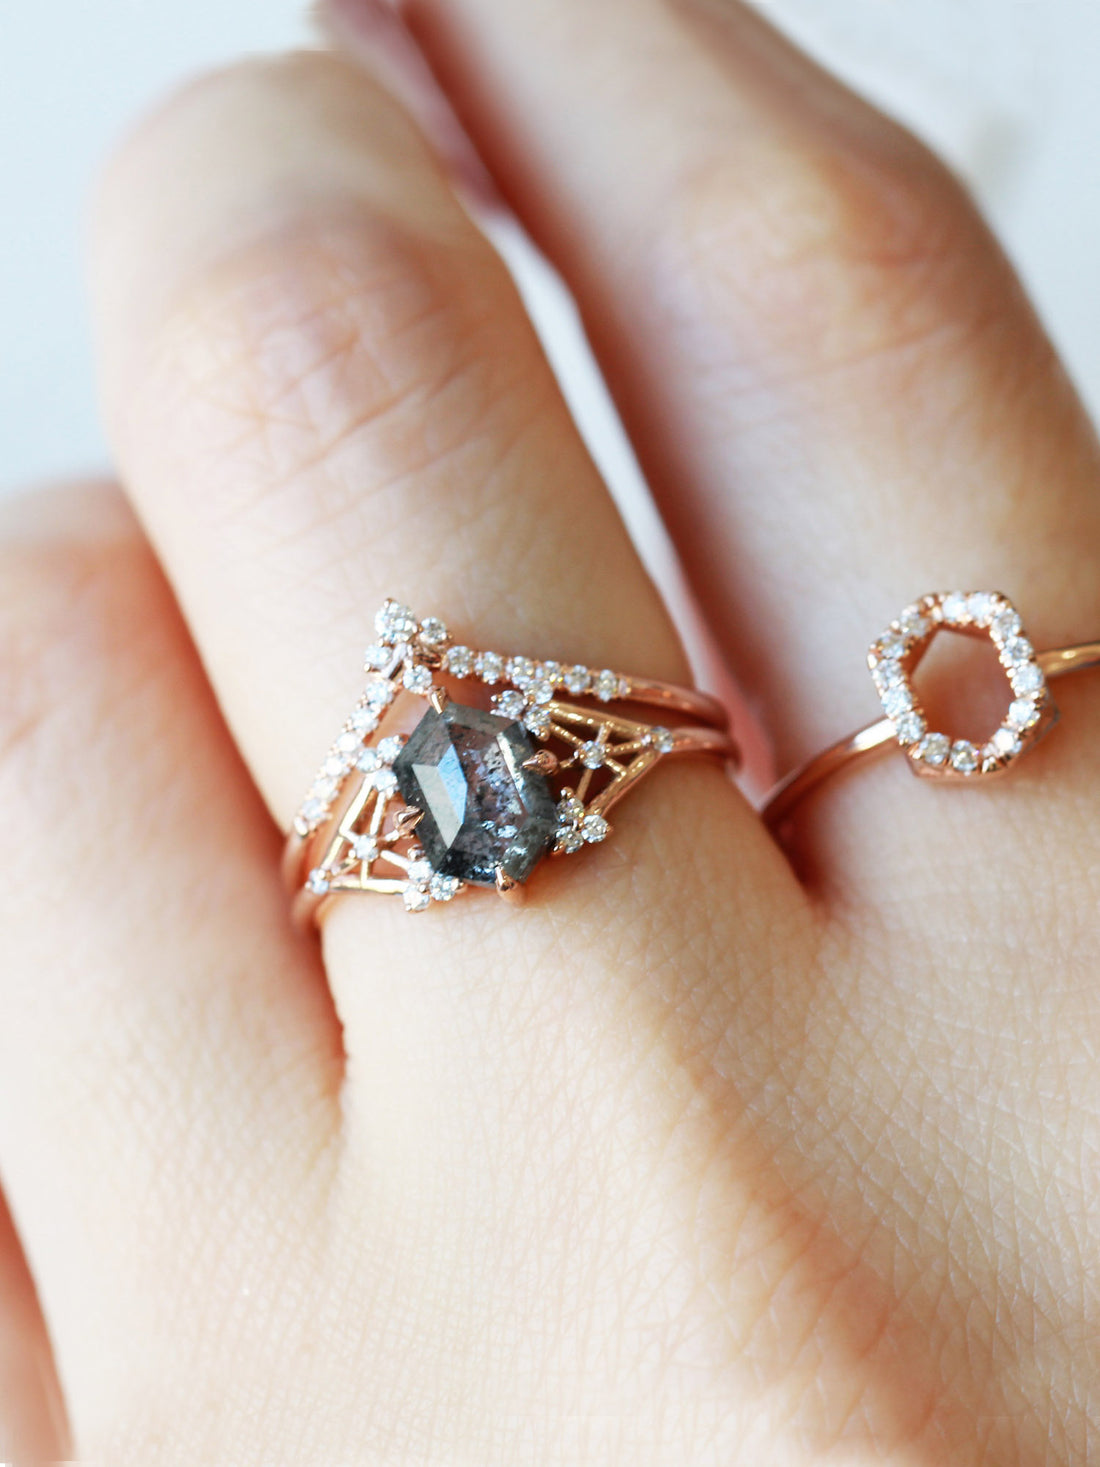 Salt and pepper diamond engagement ring unique fine jewelry art deco engagement ring rose gold diamond proposal ring